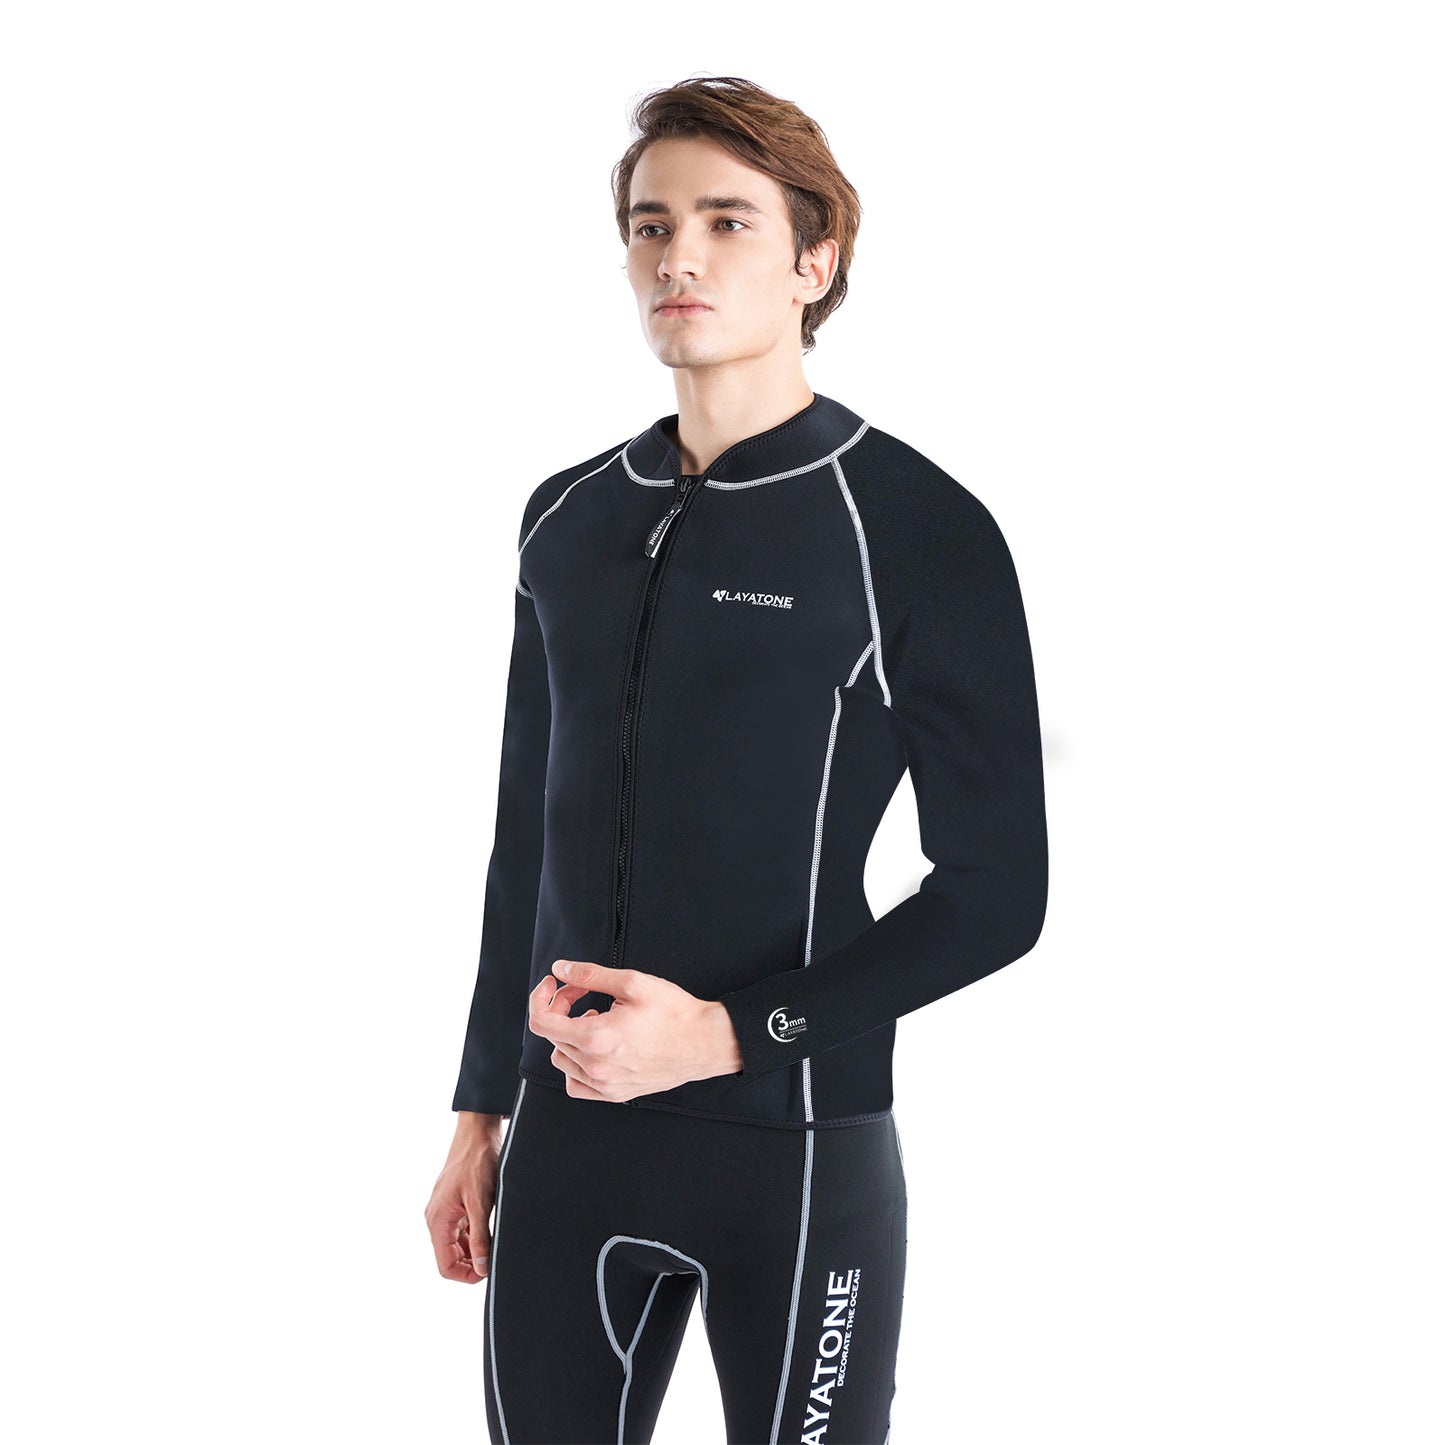 LAYATONE Mens Wetsuit Top Jacket 2mm or 3mm - Neoprene Long Sleeve for Warmth &amp; Comfort- Surfing, Snorkeling, All Watersports - w/Extended Back Flap and Durable YKK Locking Front Zipper